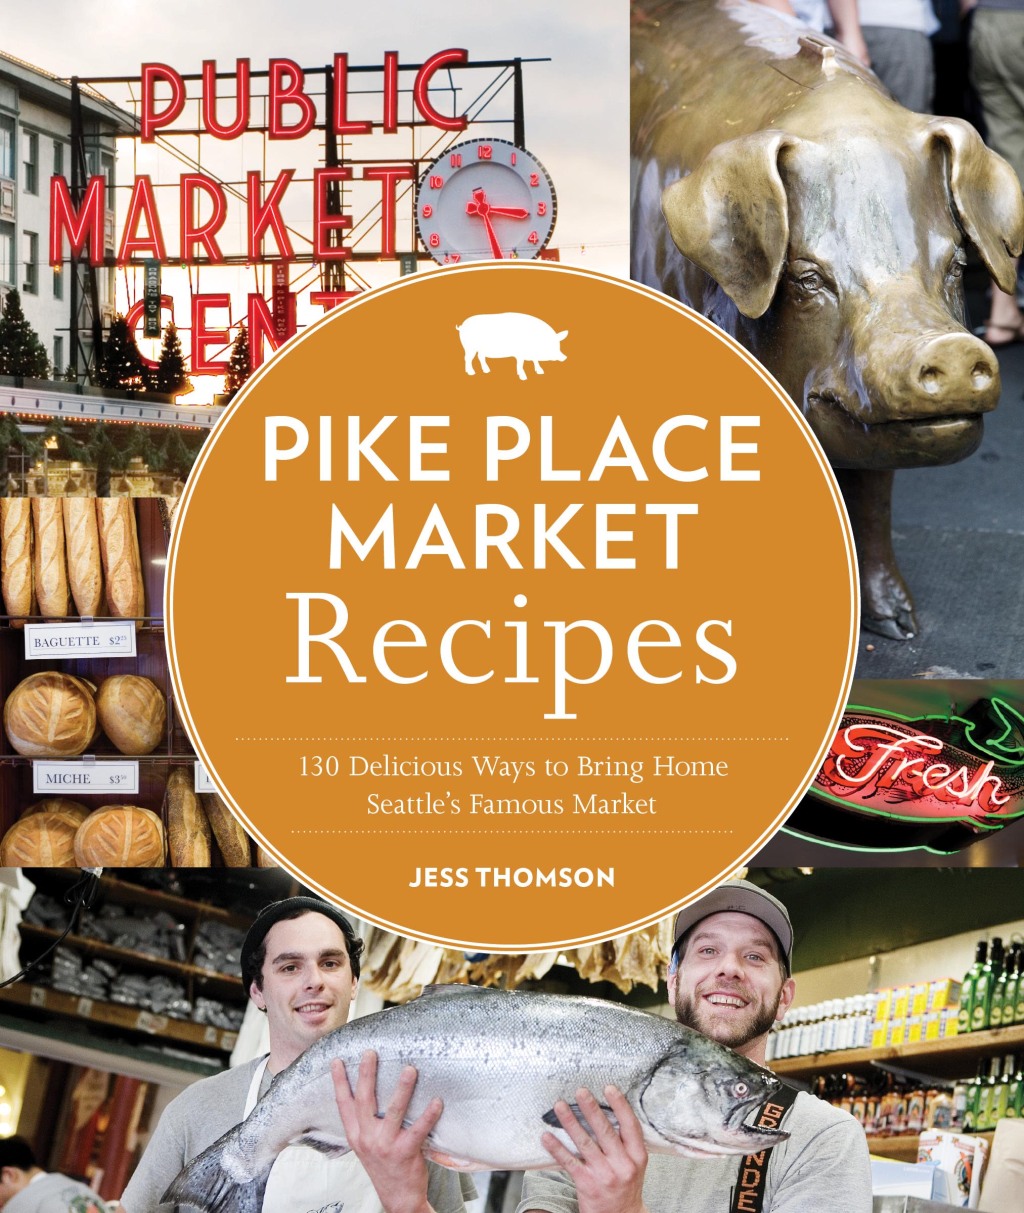 Day 4 Foodportunity Giveaway, Pike Place Market Recipes Cookbook